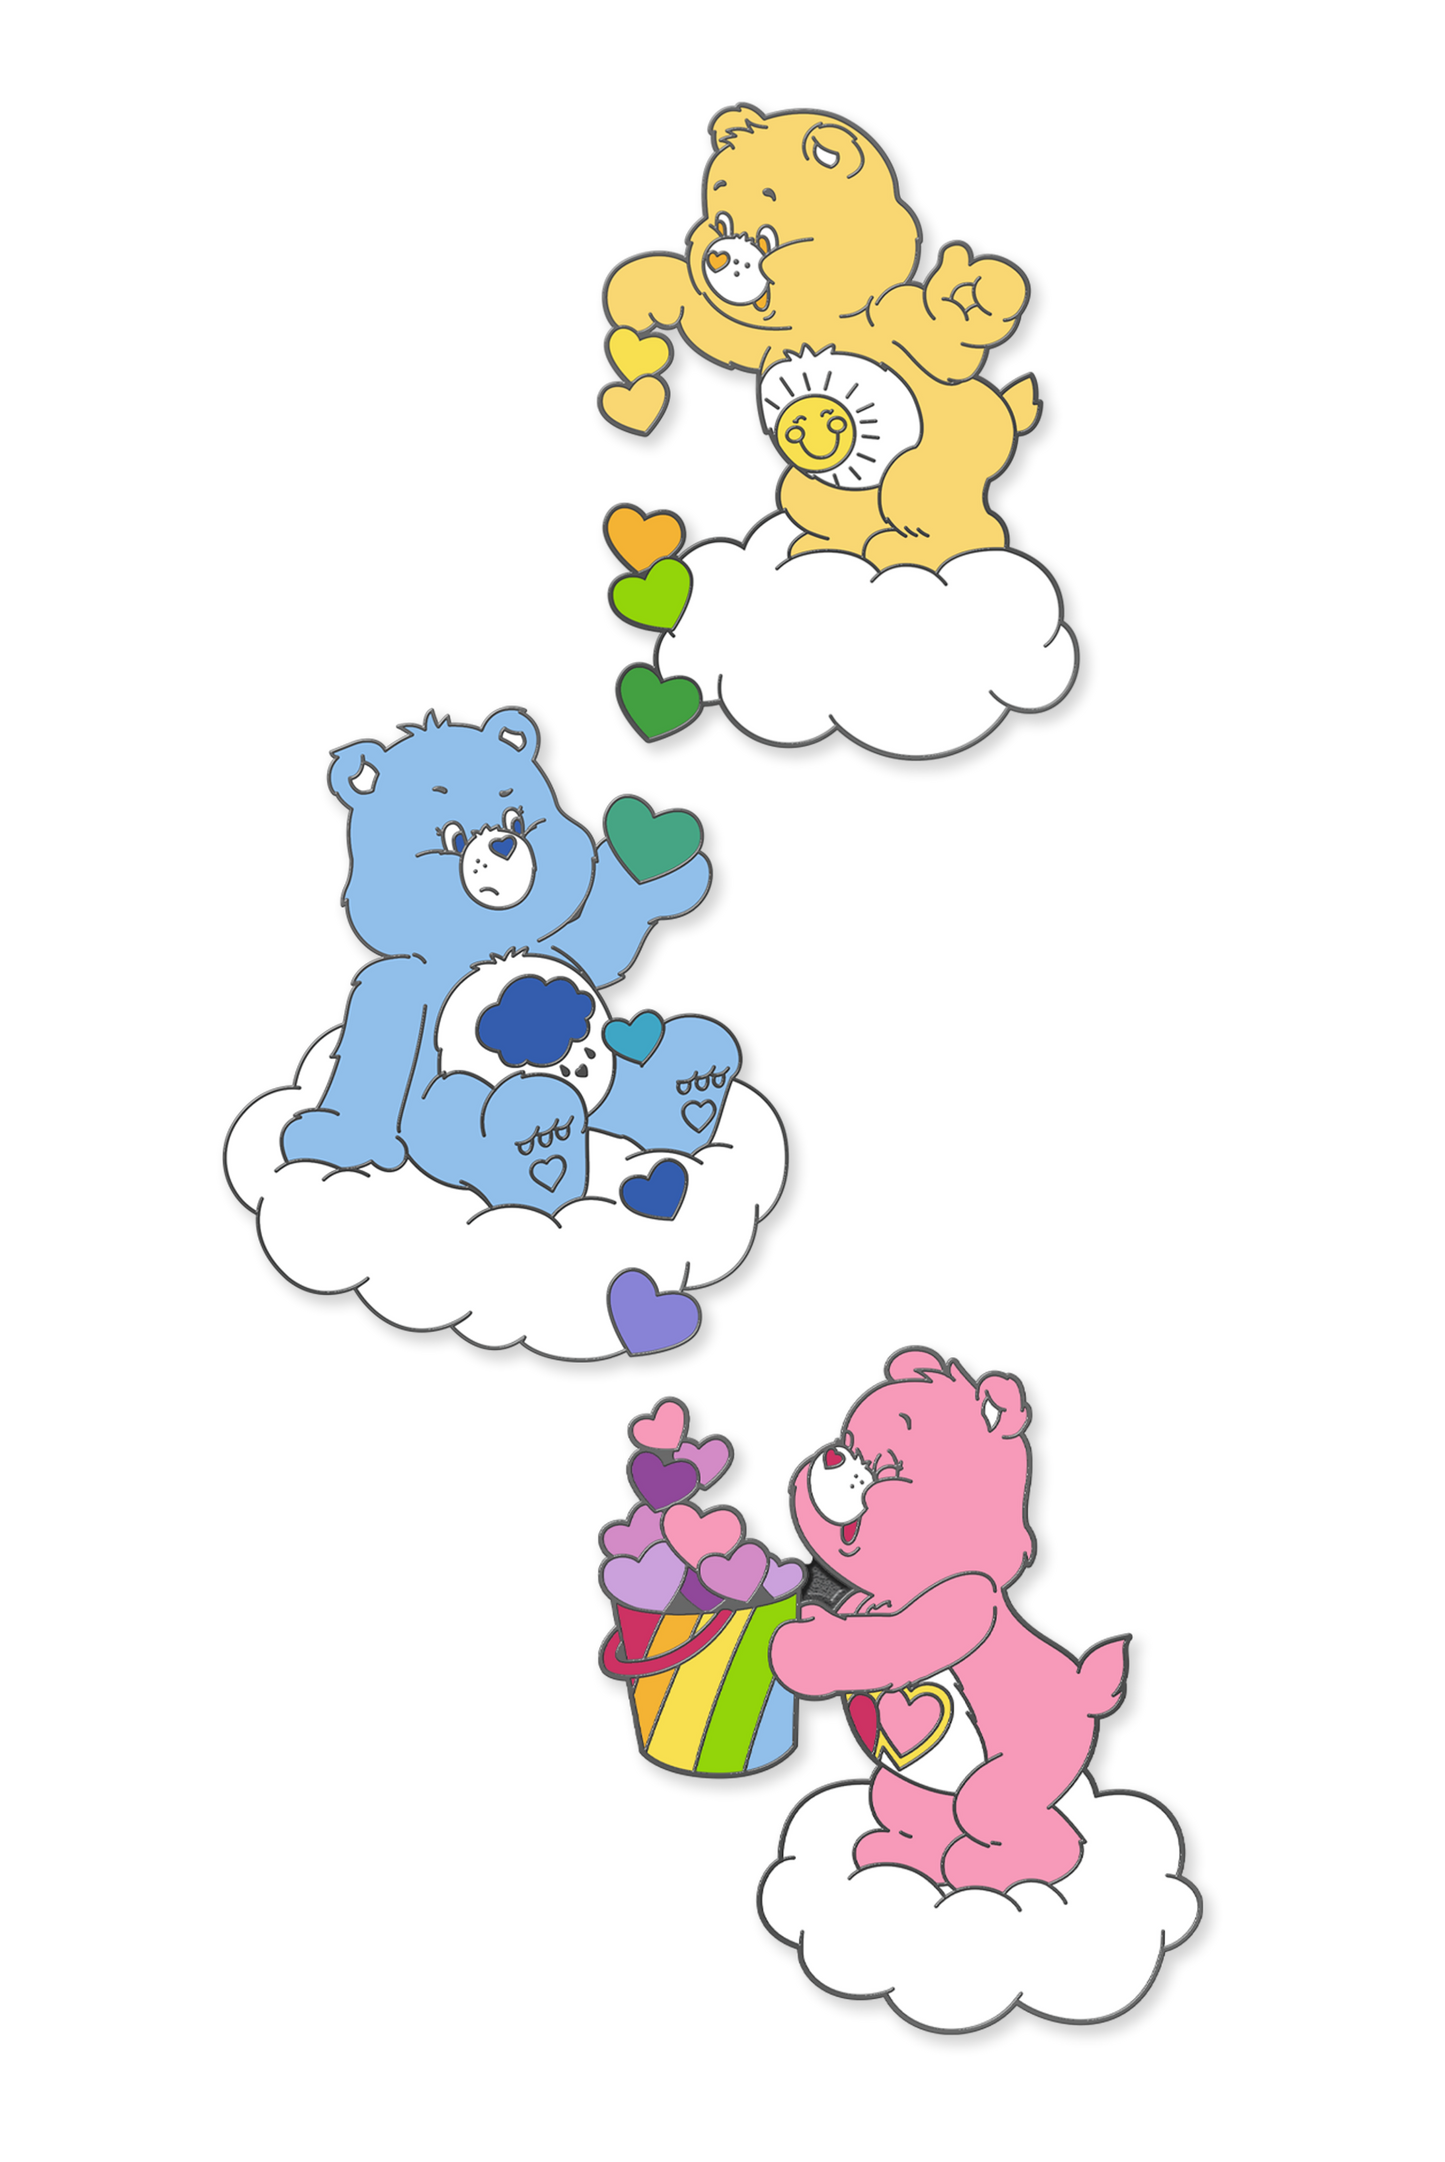 Grumpy Care Bear Pride Pin – What's Your Passion Jewelry